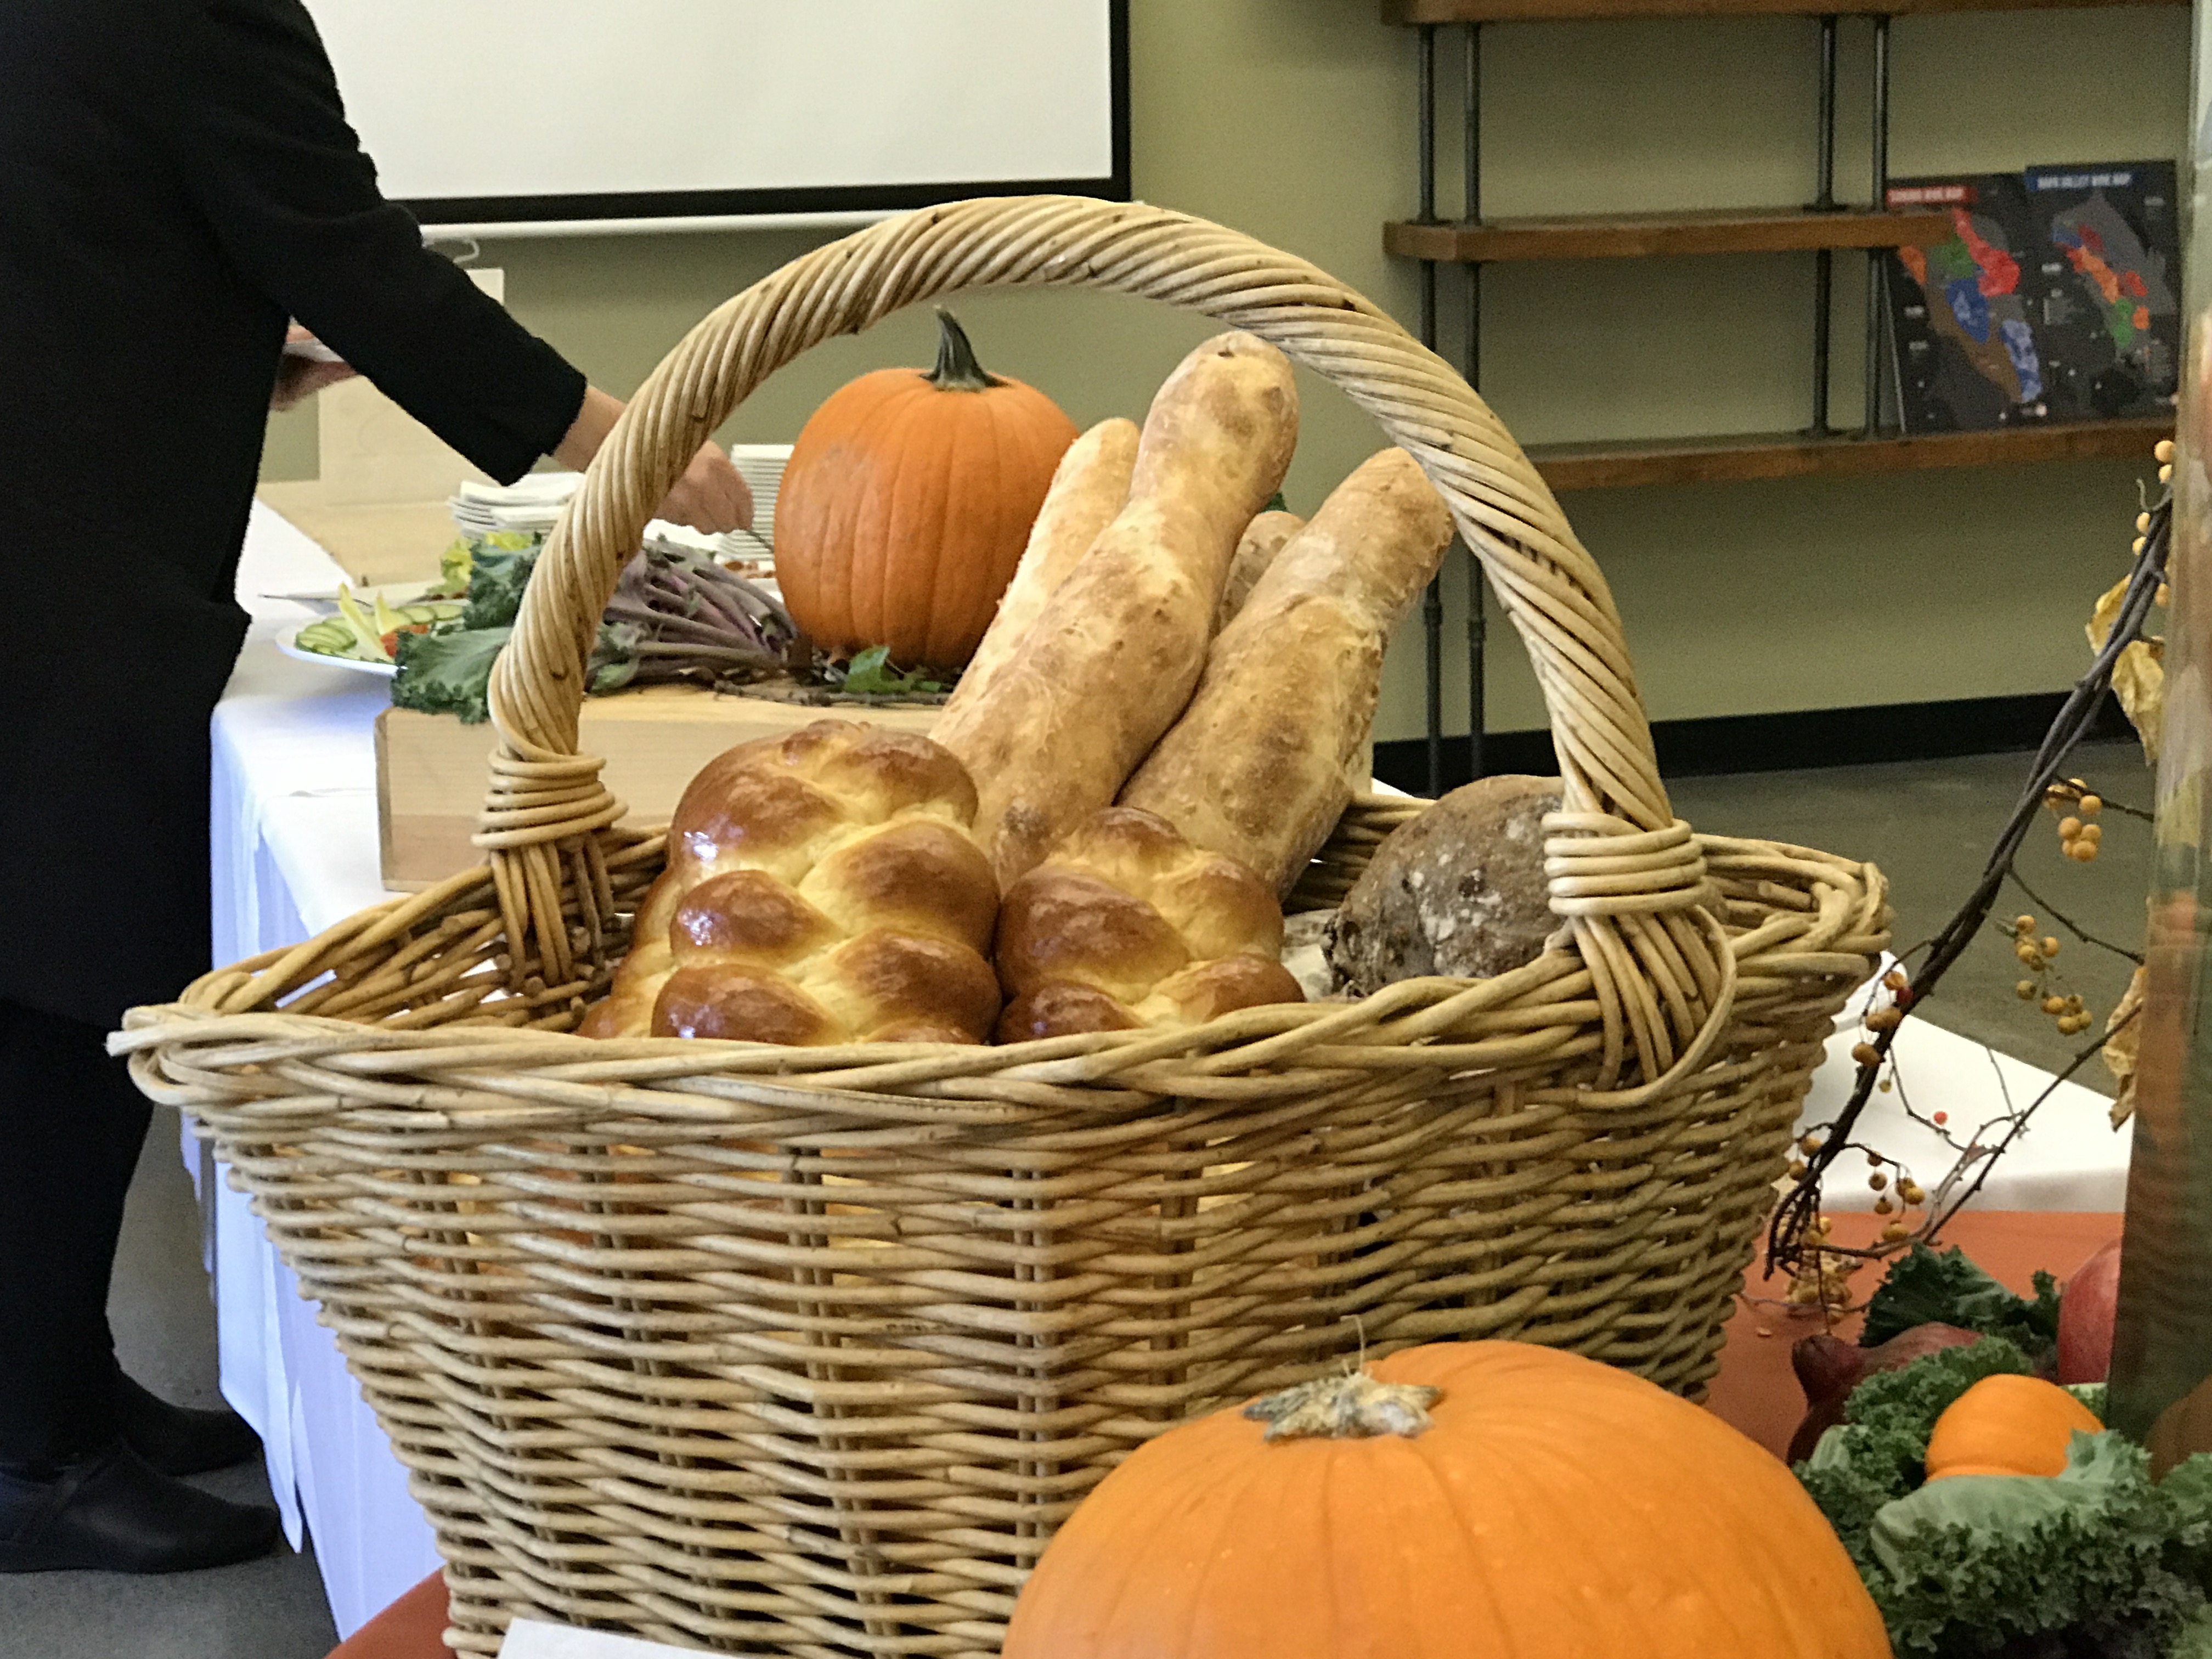 Bread made of different grains that only grow during the fall are arranged in a basket for guests to taste and enjoy on Wednesday, Oct. 18, 2017. Photo by Diane Carter. 